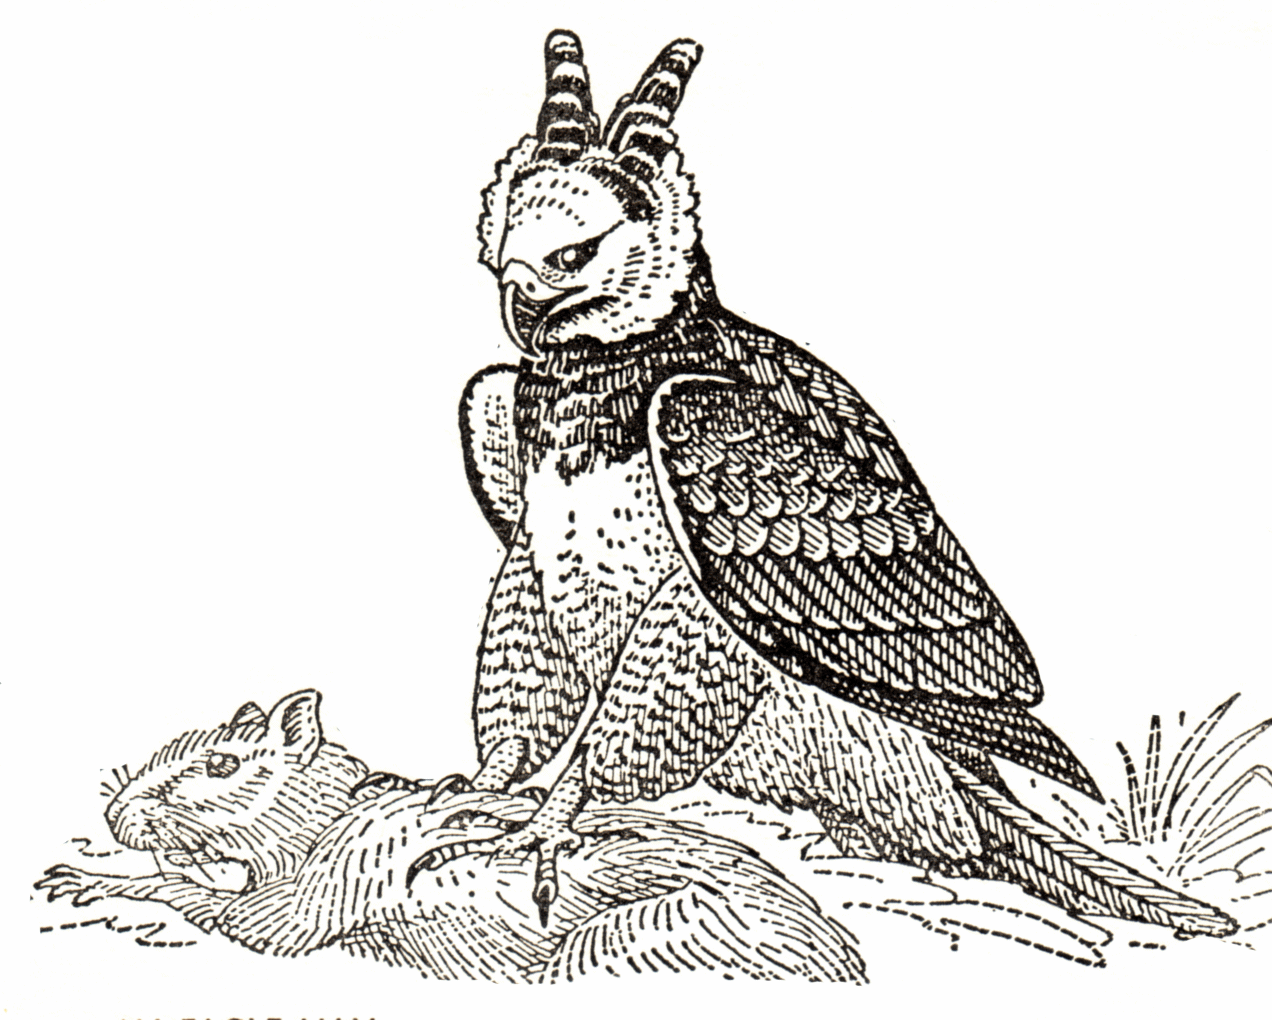 Harpy Eagle coloring, Download Harpy Eagle coloring for free 2019